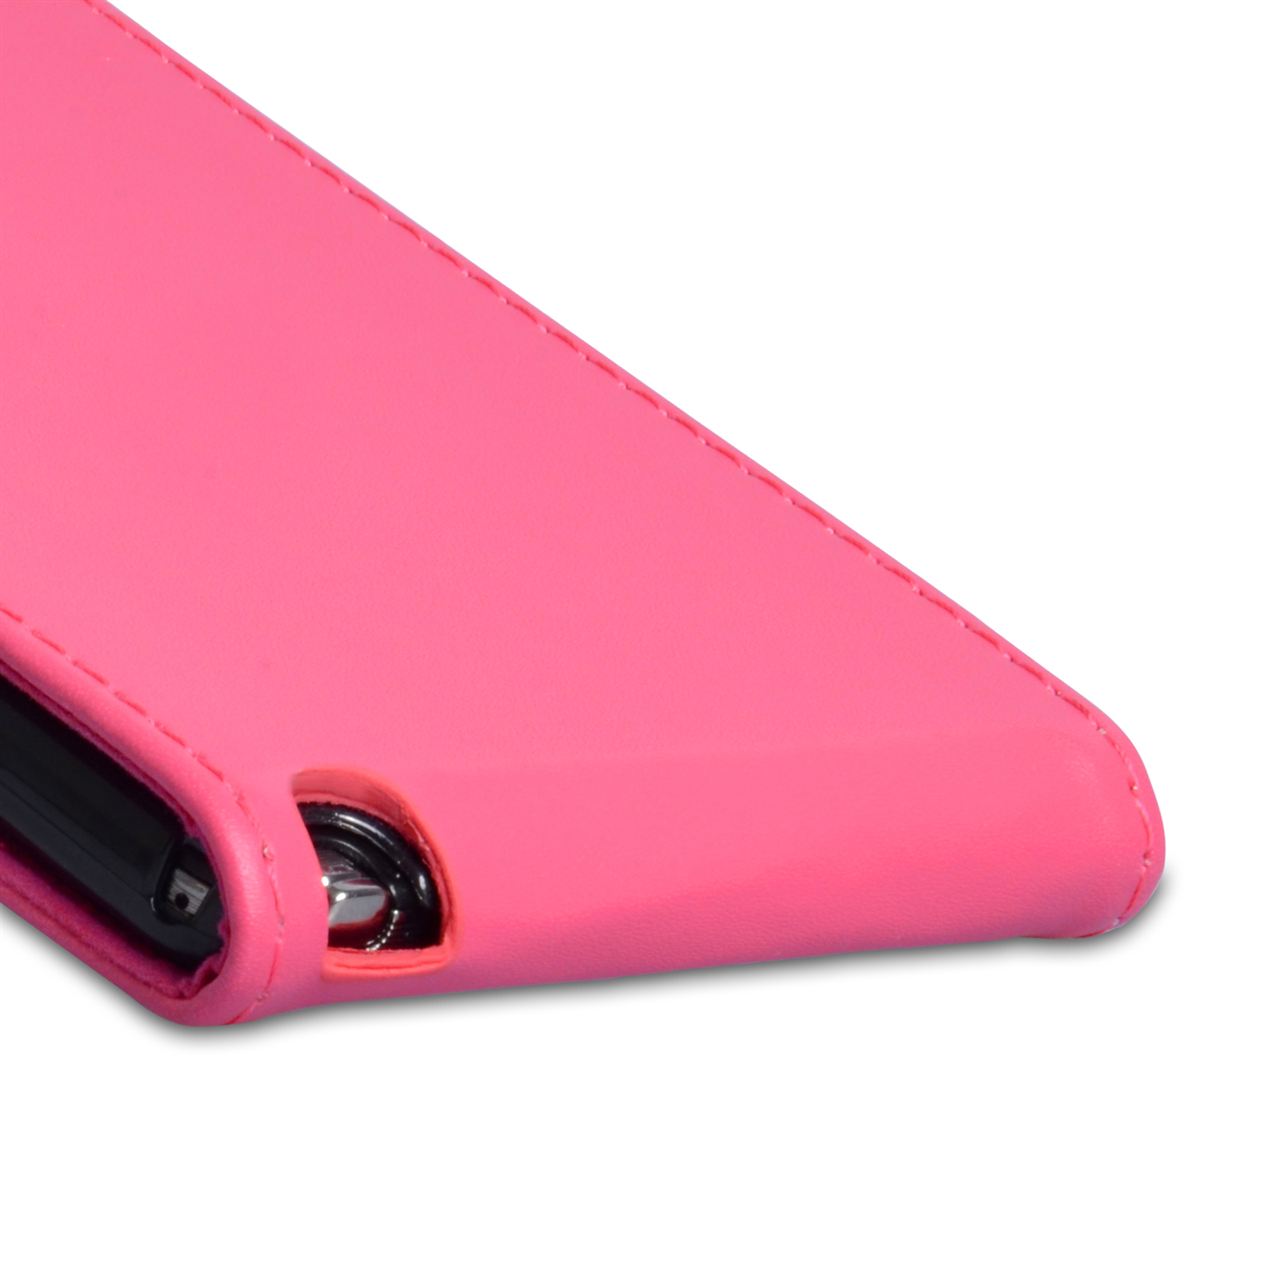 YouSave Samsung Galaxy Note 3 Leather Effect Flip Case - Hot Pink